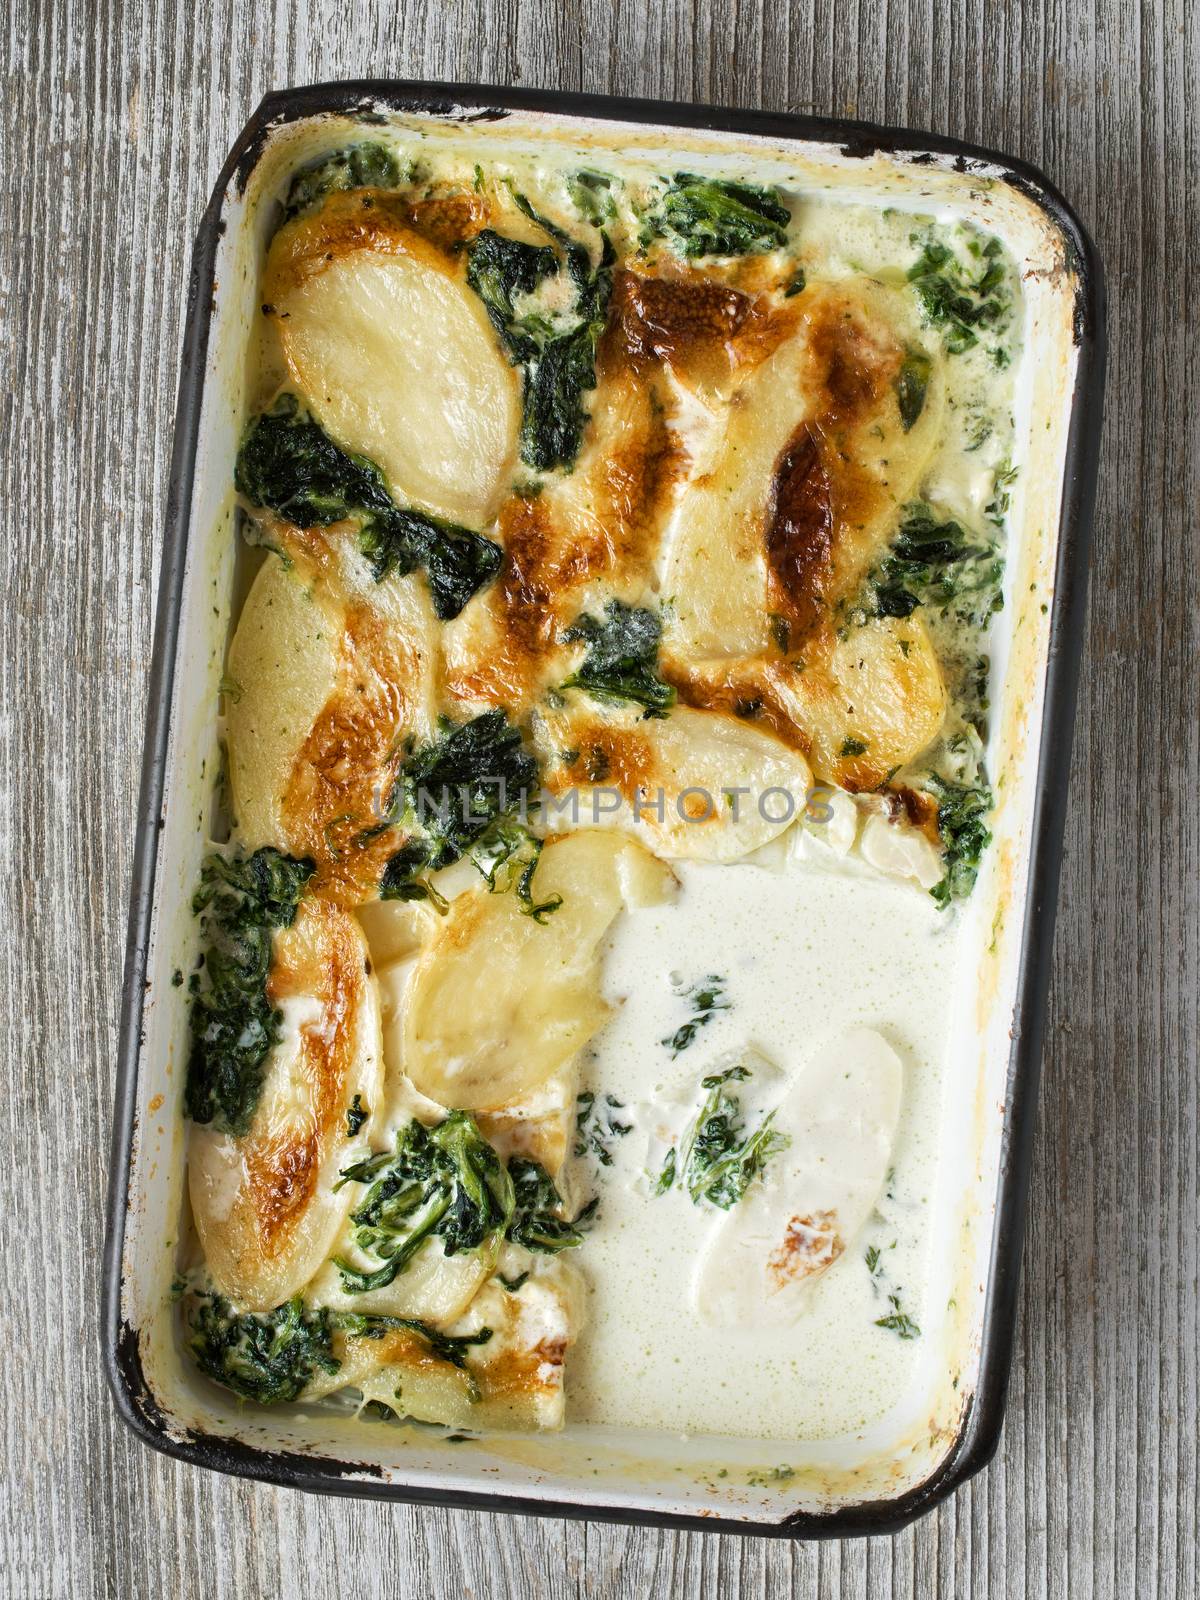 rustic golden spinach potato gratin dauphinois by zkruger